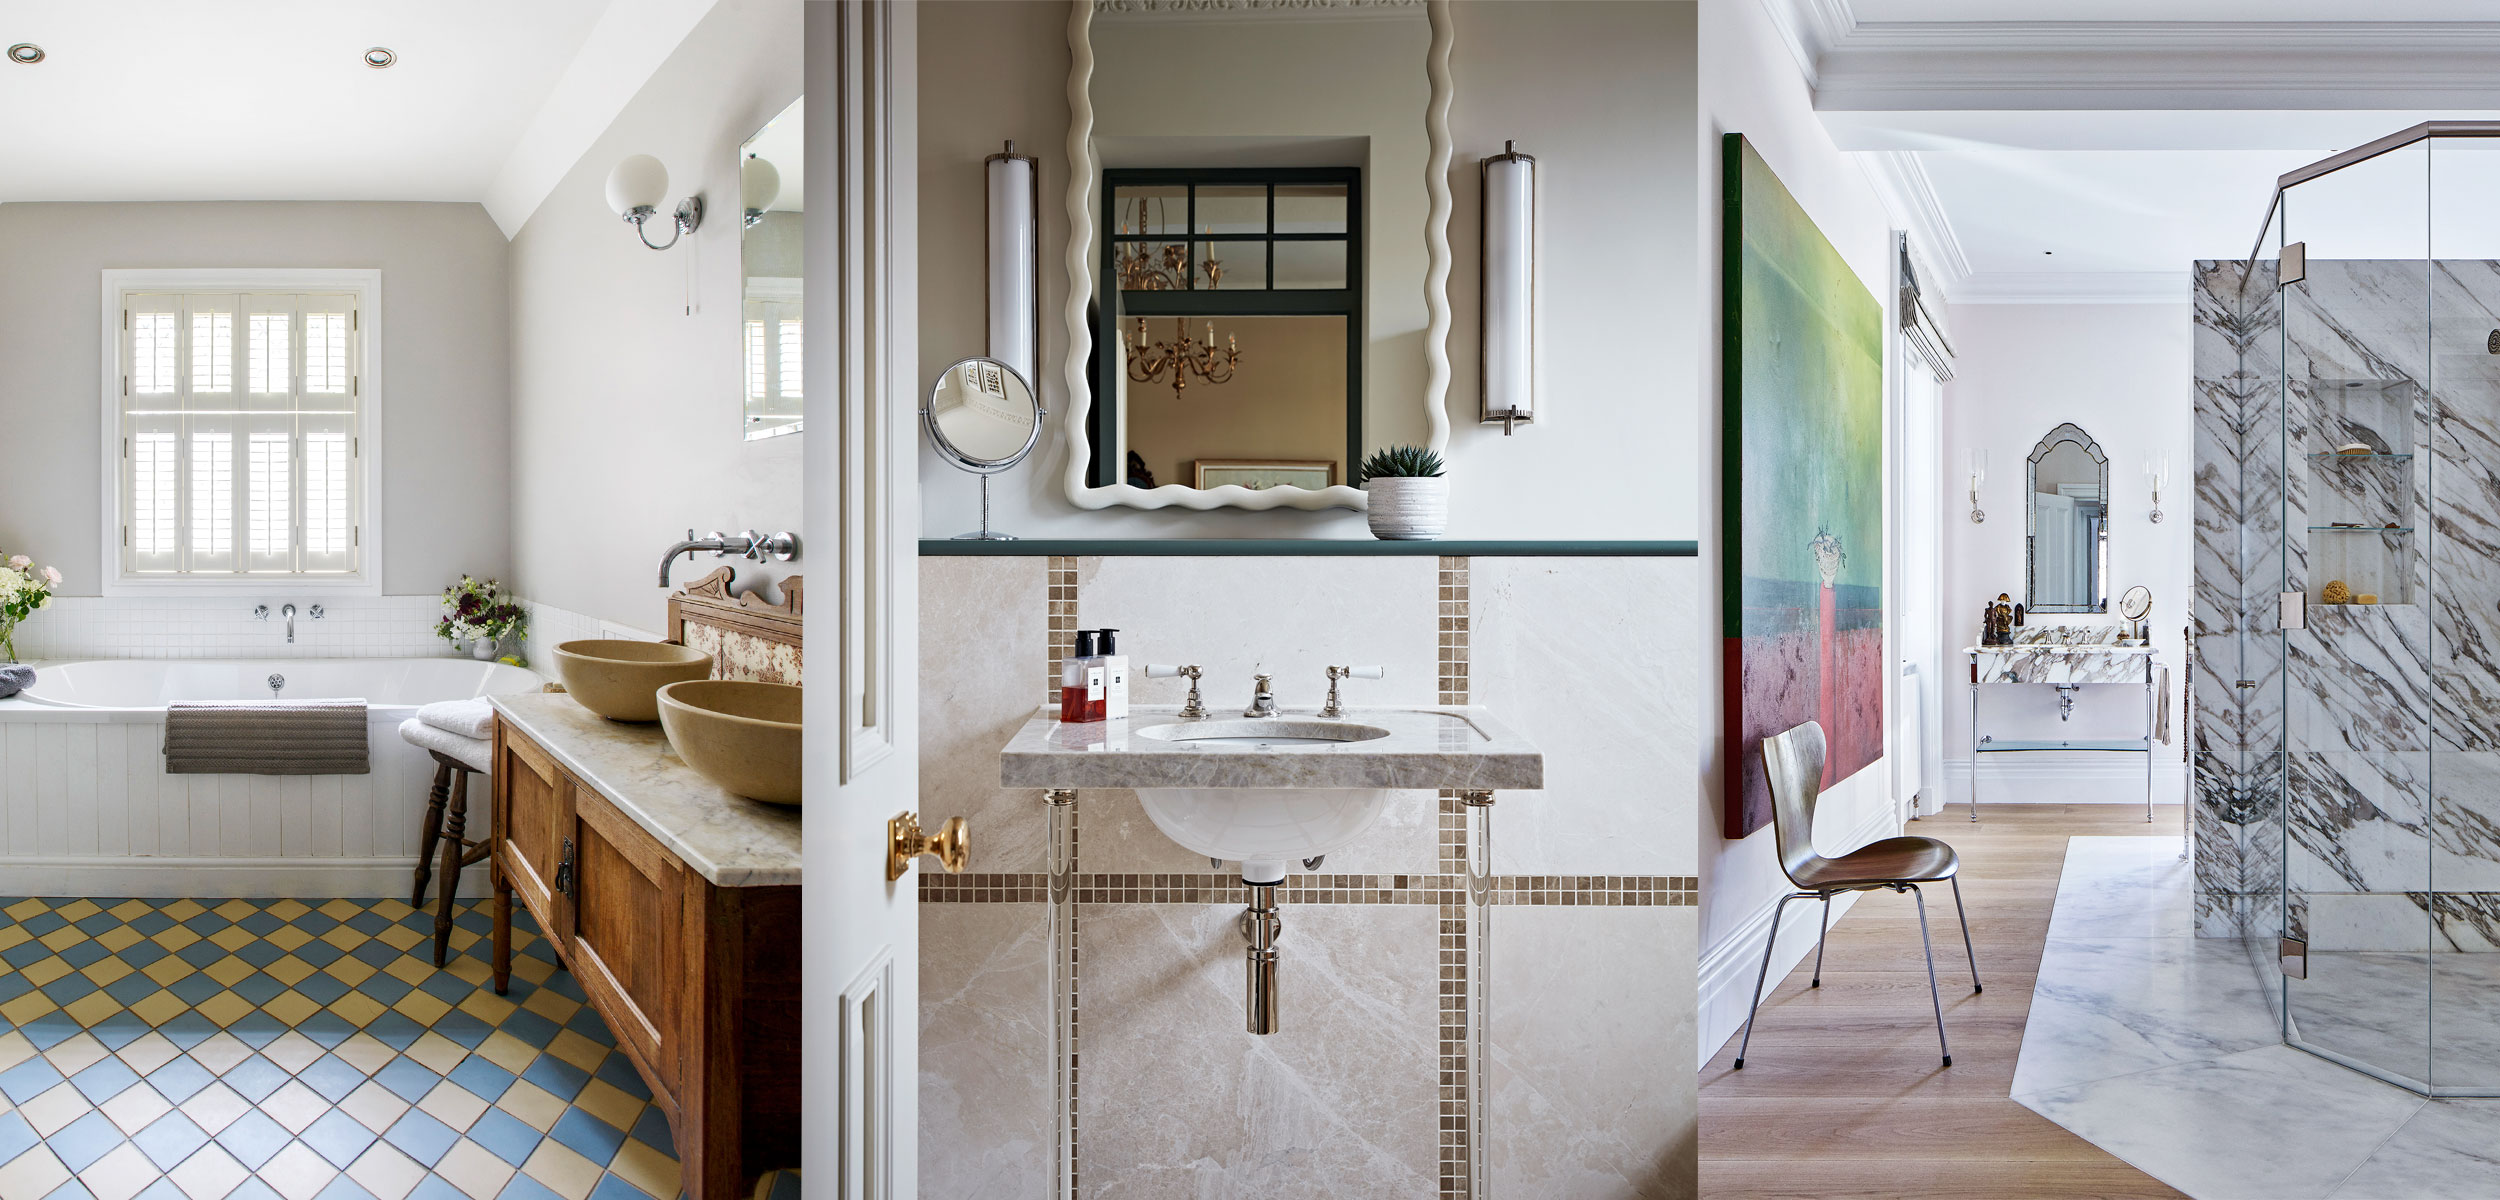 16 bathroom design ideas that work for a busy family